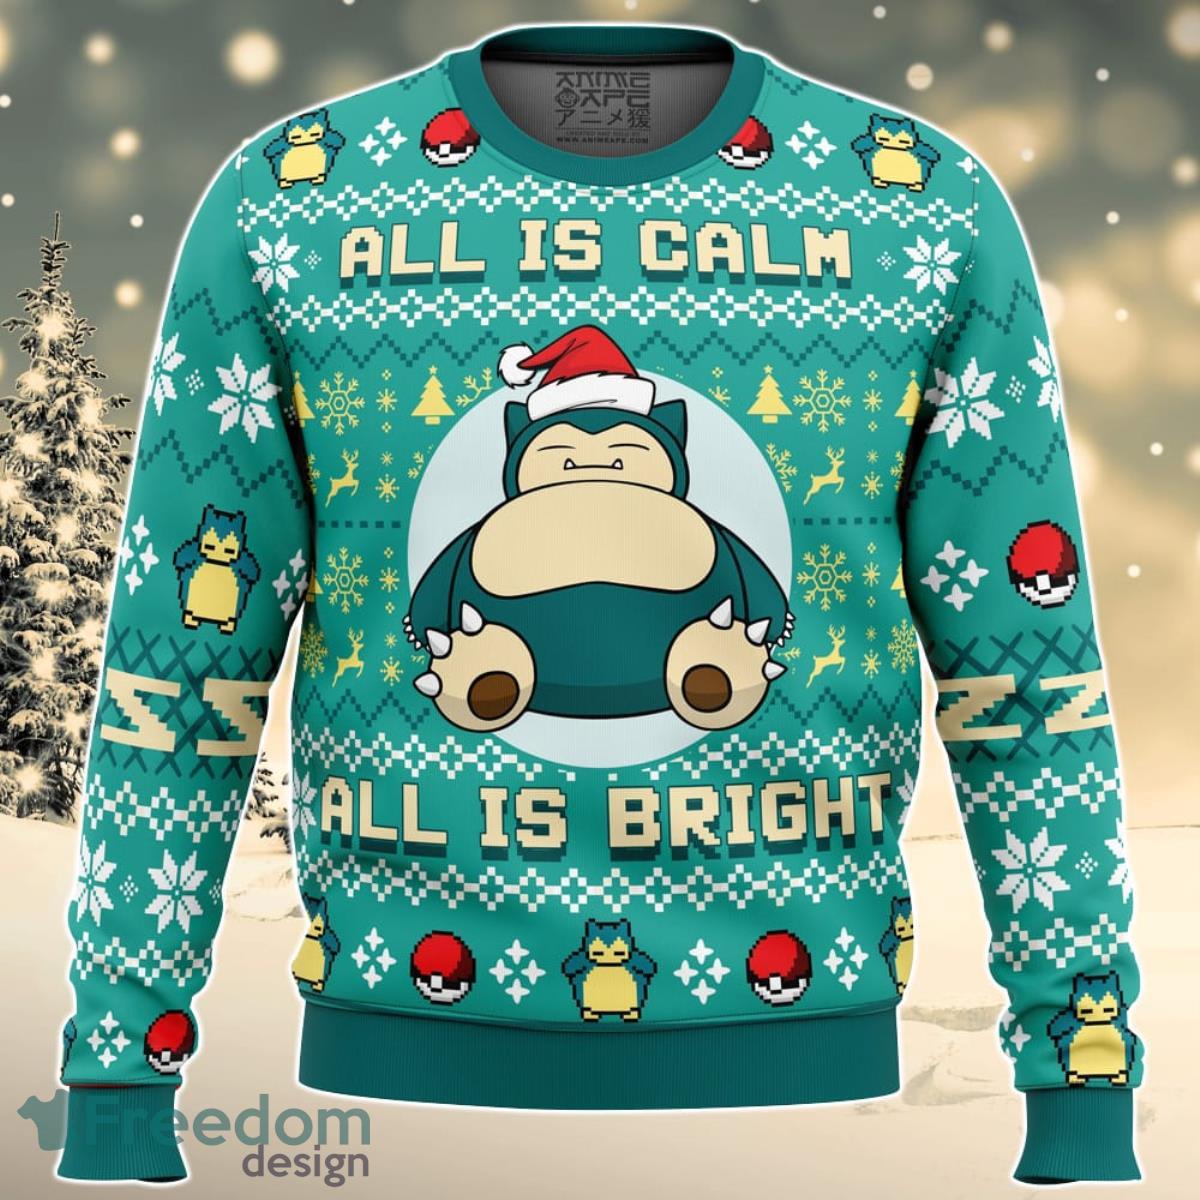 All is Calm All Bright Snorlax Pokemon Ugly Christmas Sweater For Men And Women Product Photo 1